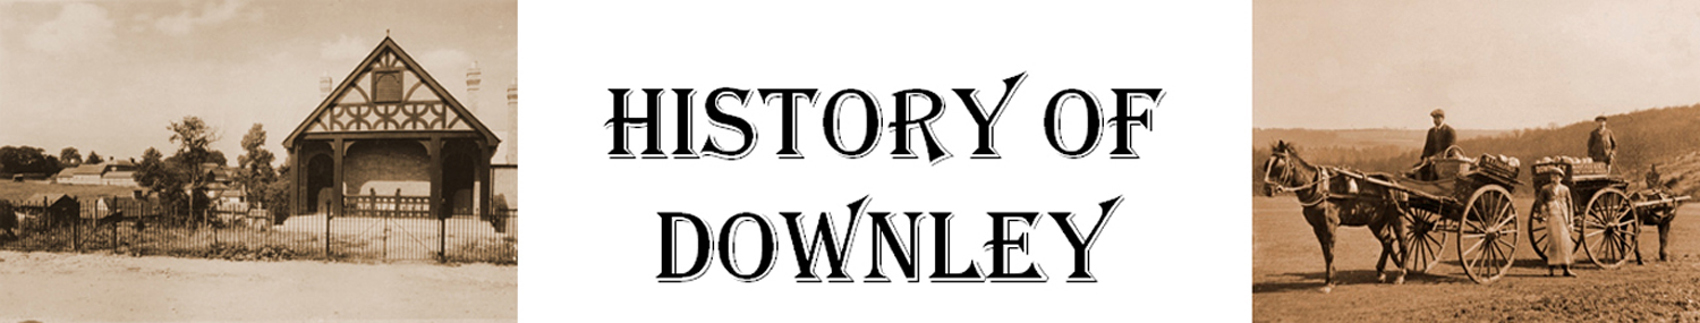 History of Downley